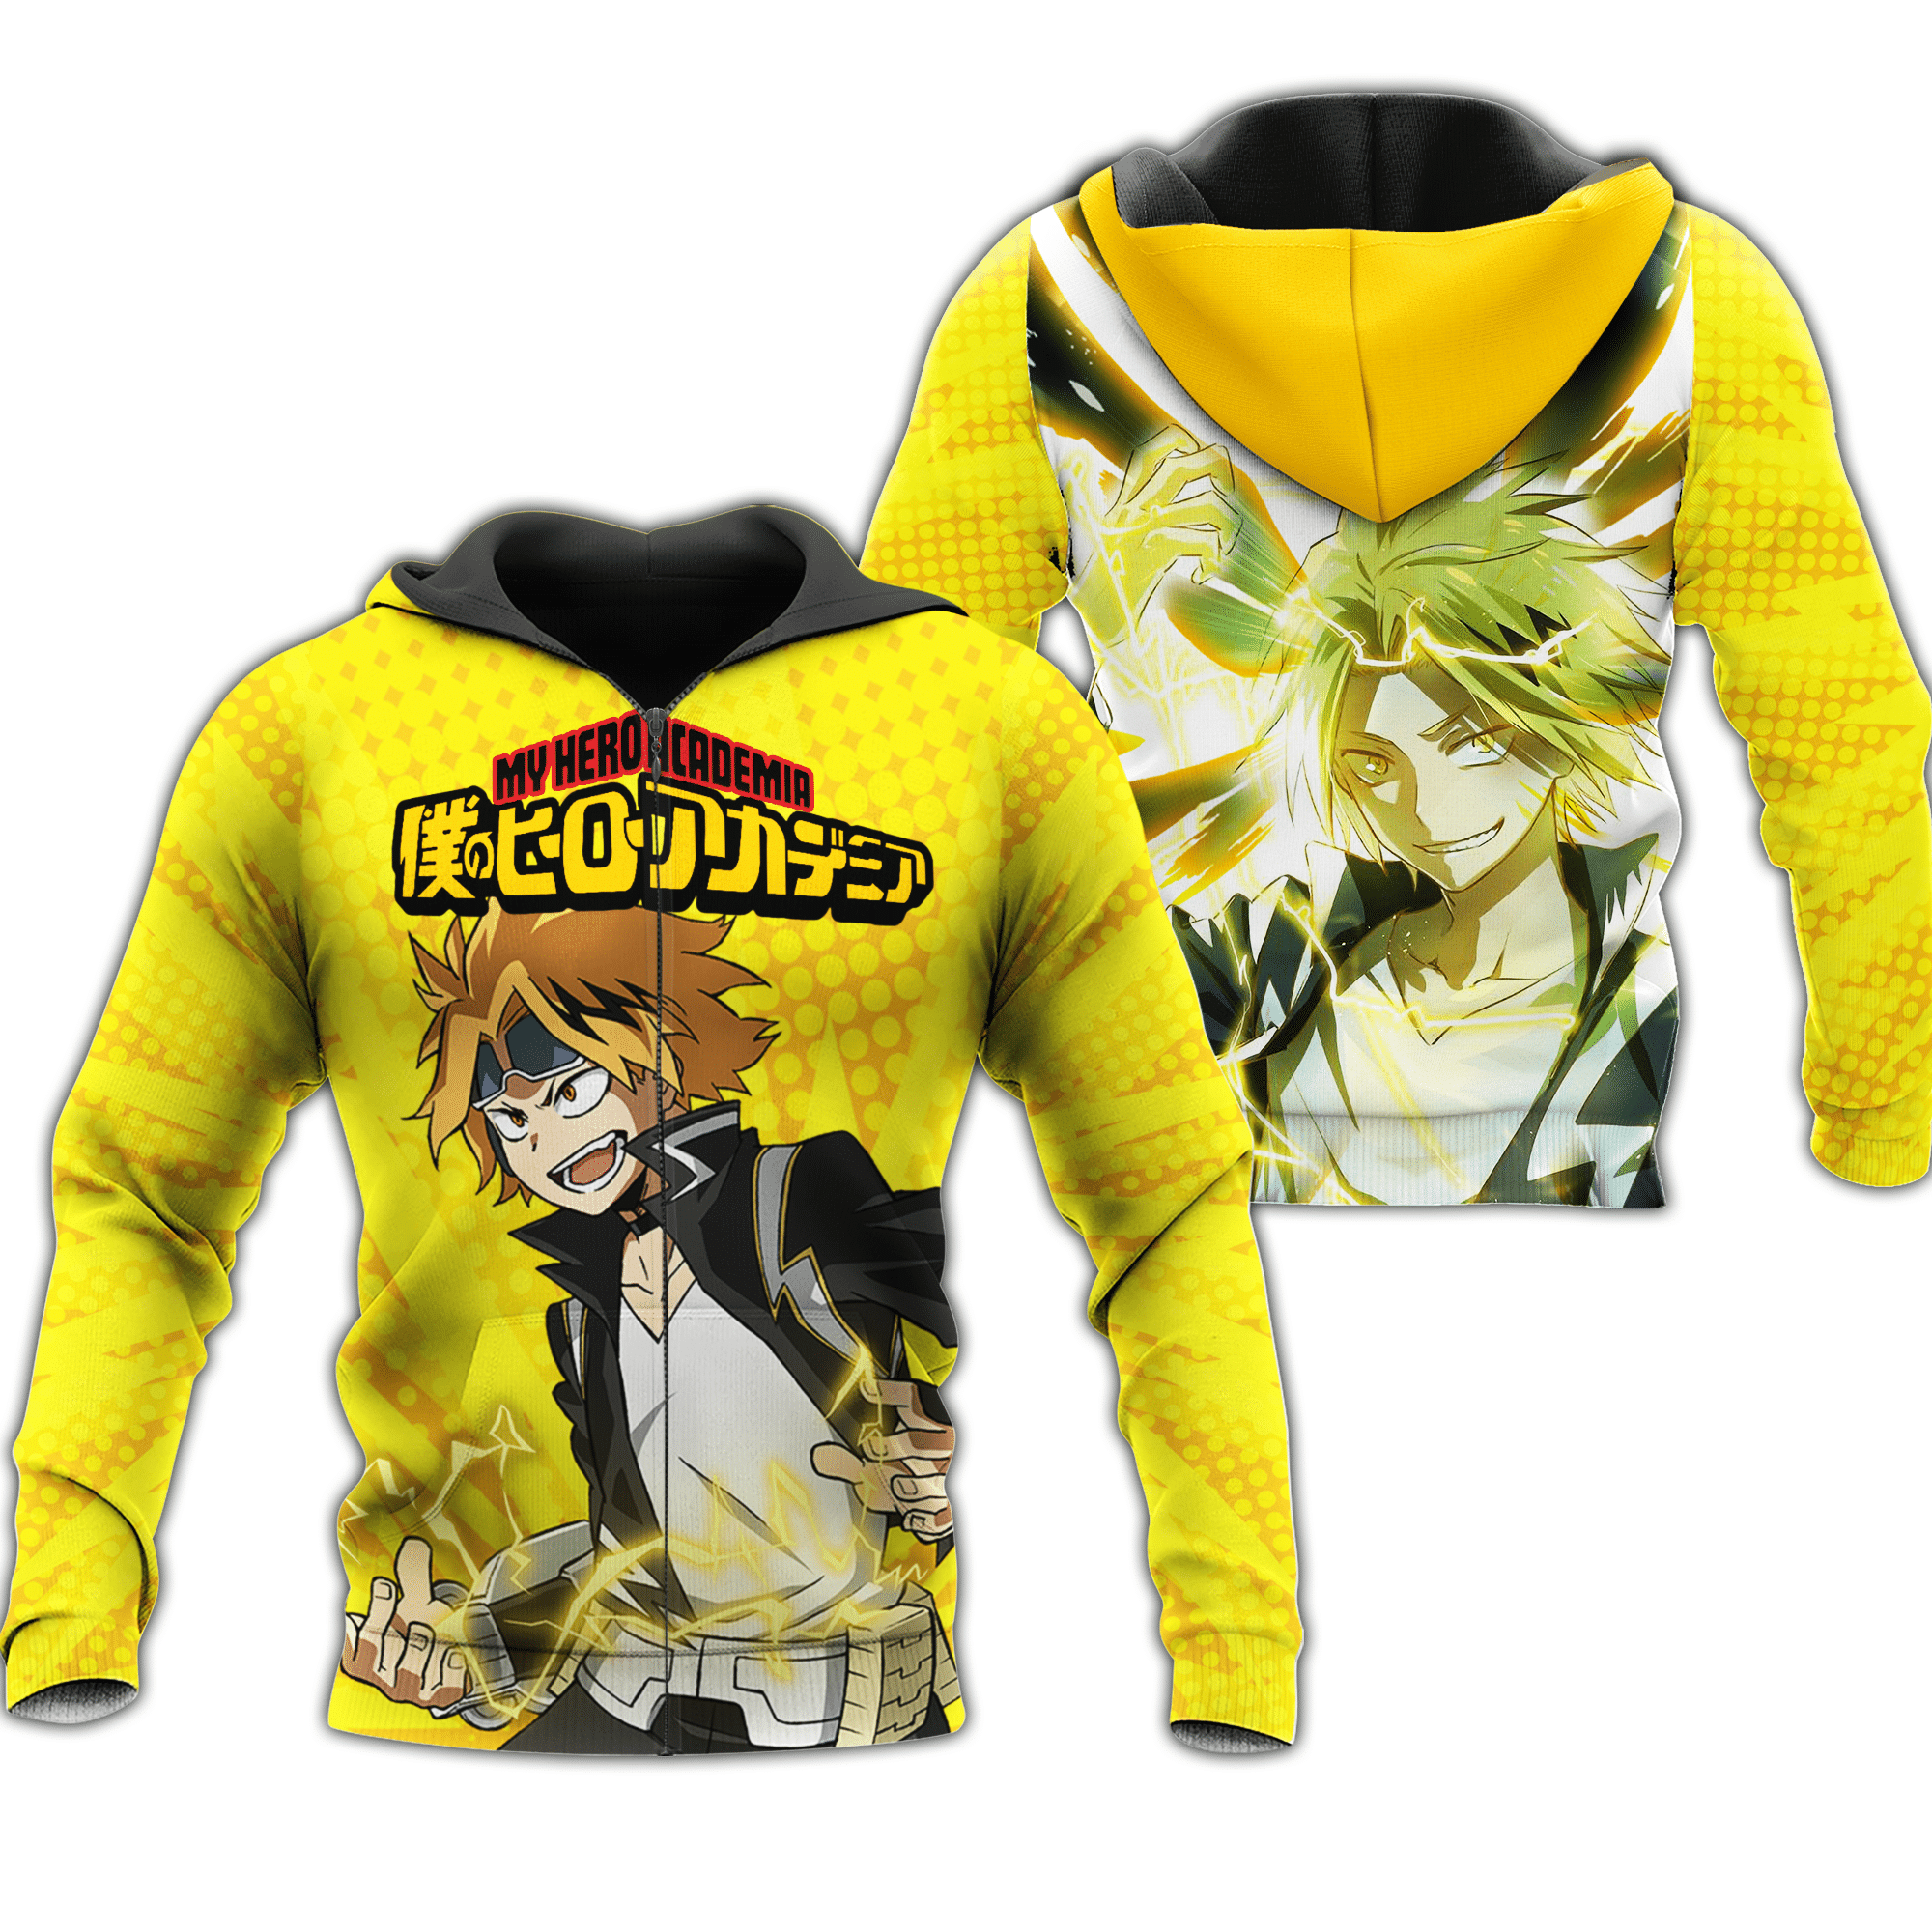 Here are some of my favorite Anime Clothing 180